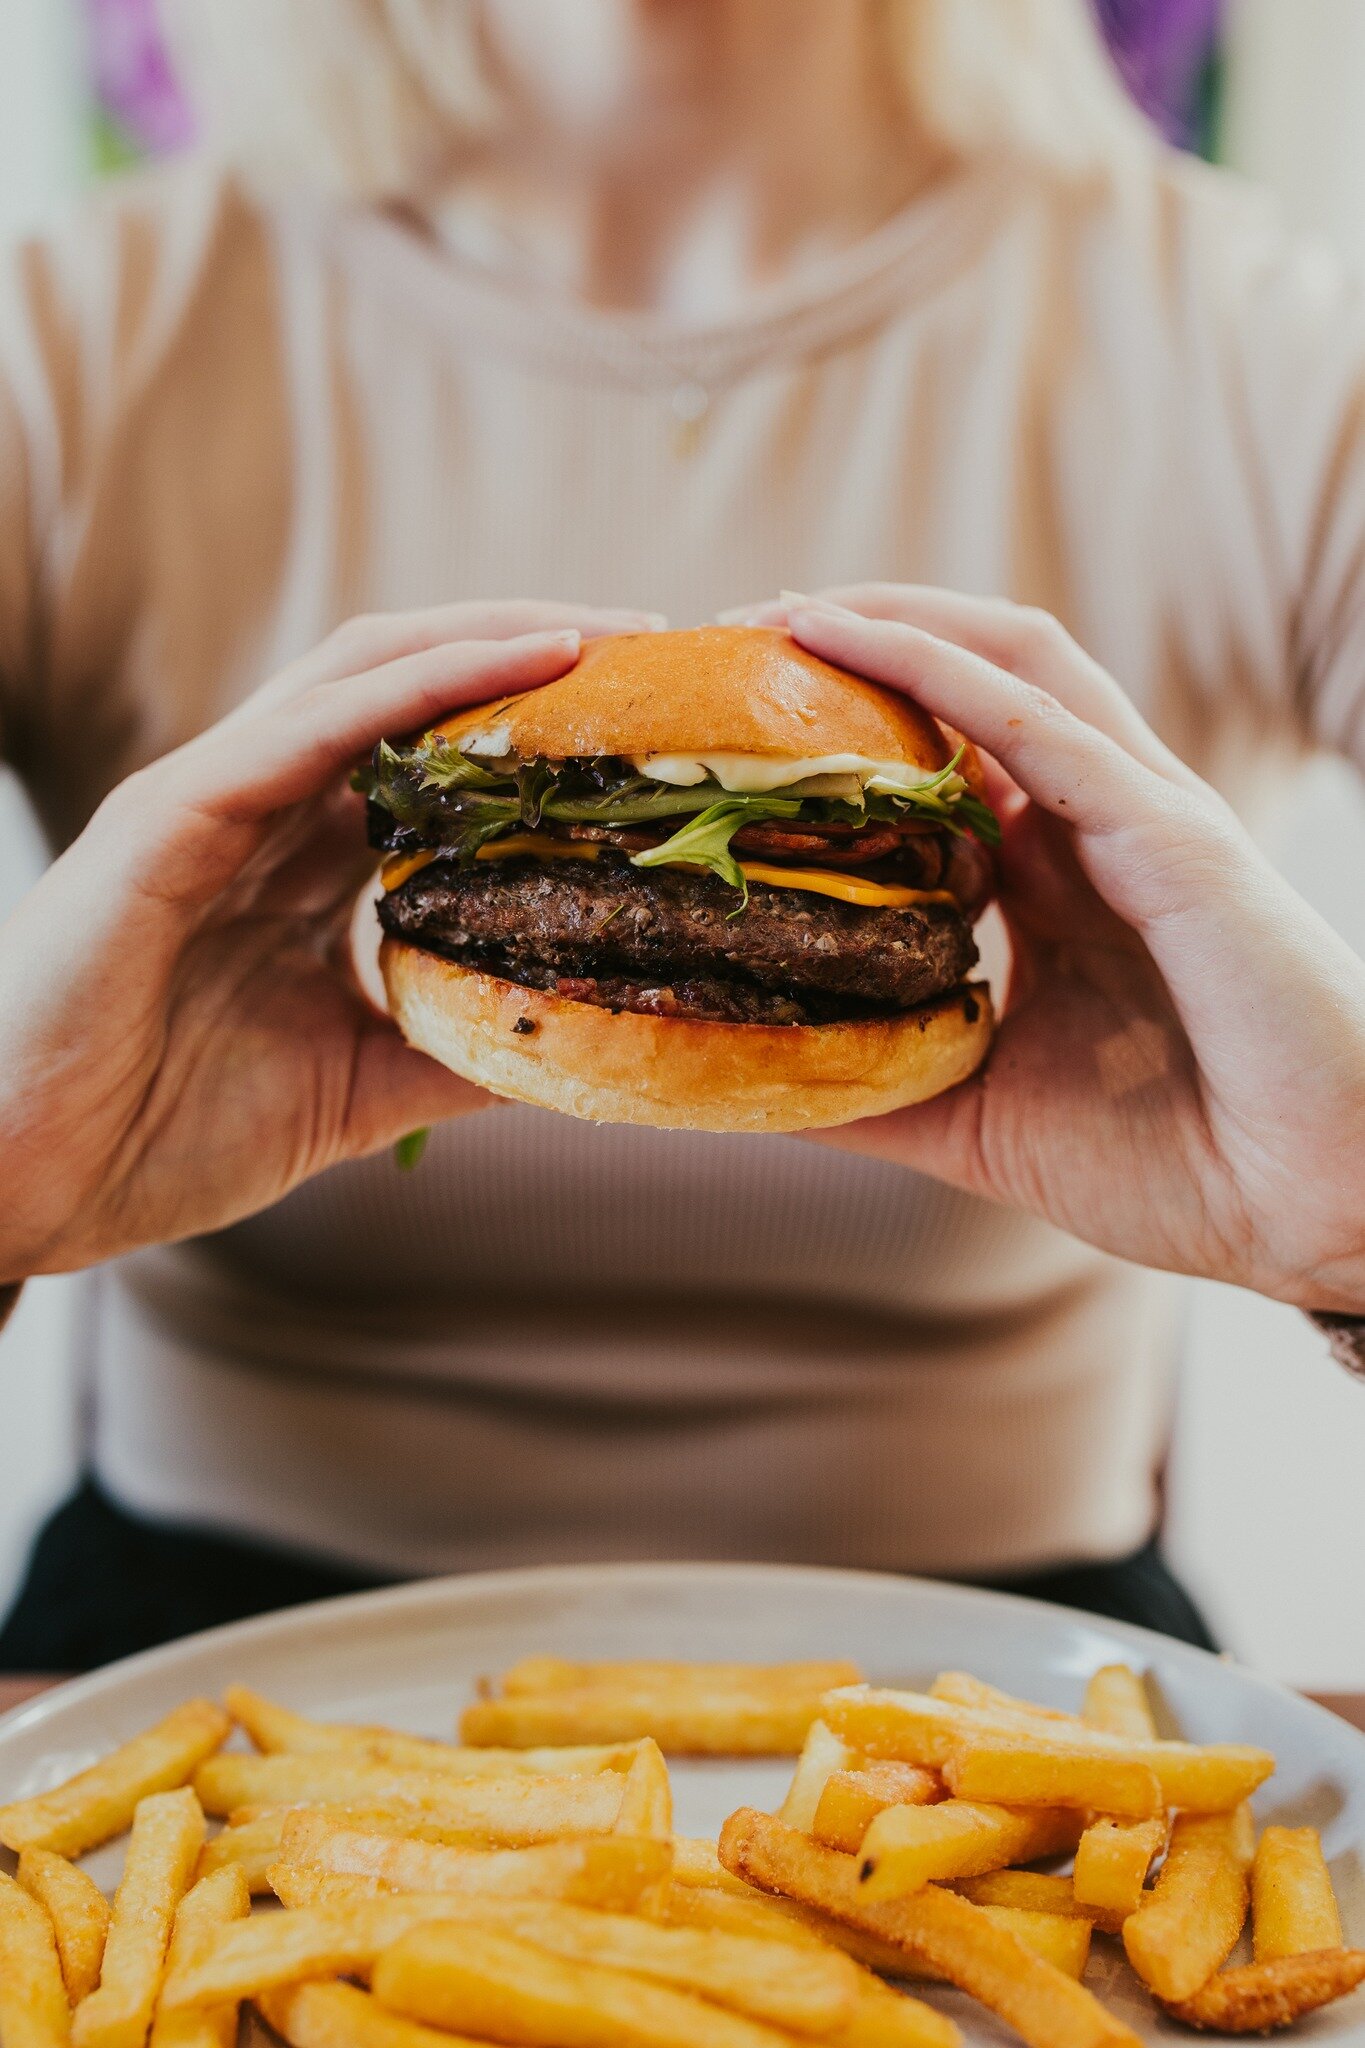 Happy weekend! 🤩

Dig into some of our favourites all weekend long, with our Meat Raffles &amp; Wheel Spins tonight 🍔🥗🍟

PLUS Happy Hour from 5-7pm every day 🍻

Book here 👉 www.yankalillahotel.com.au